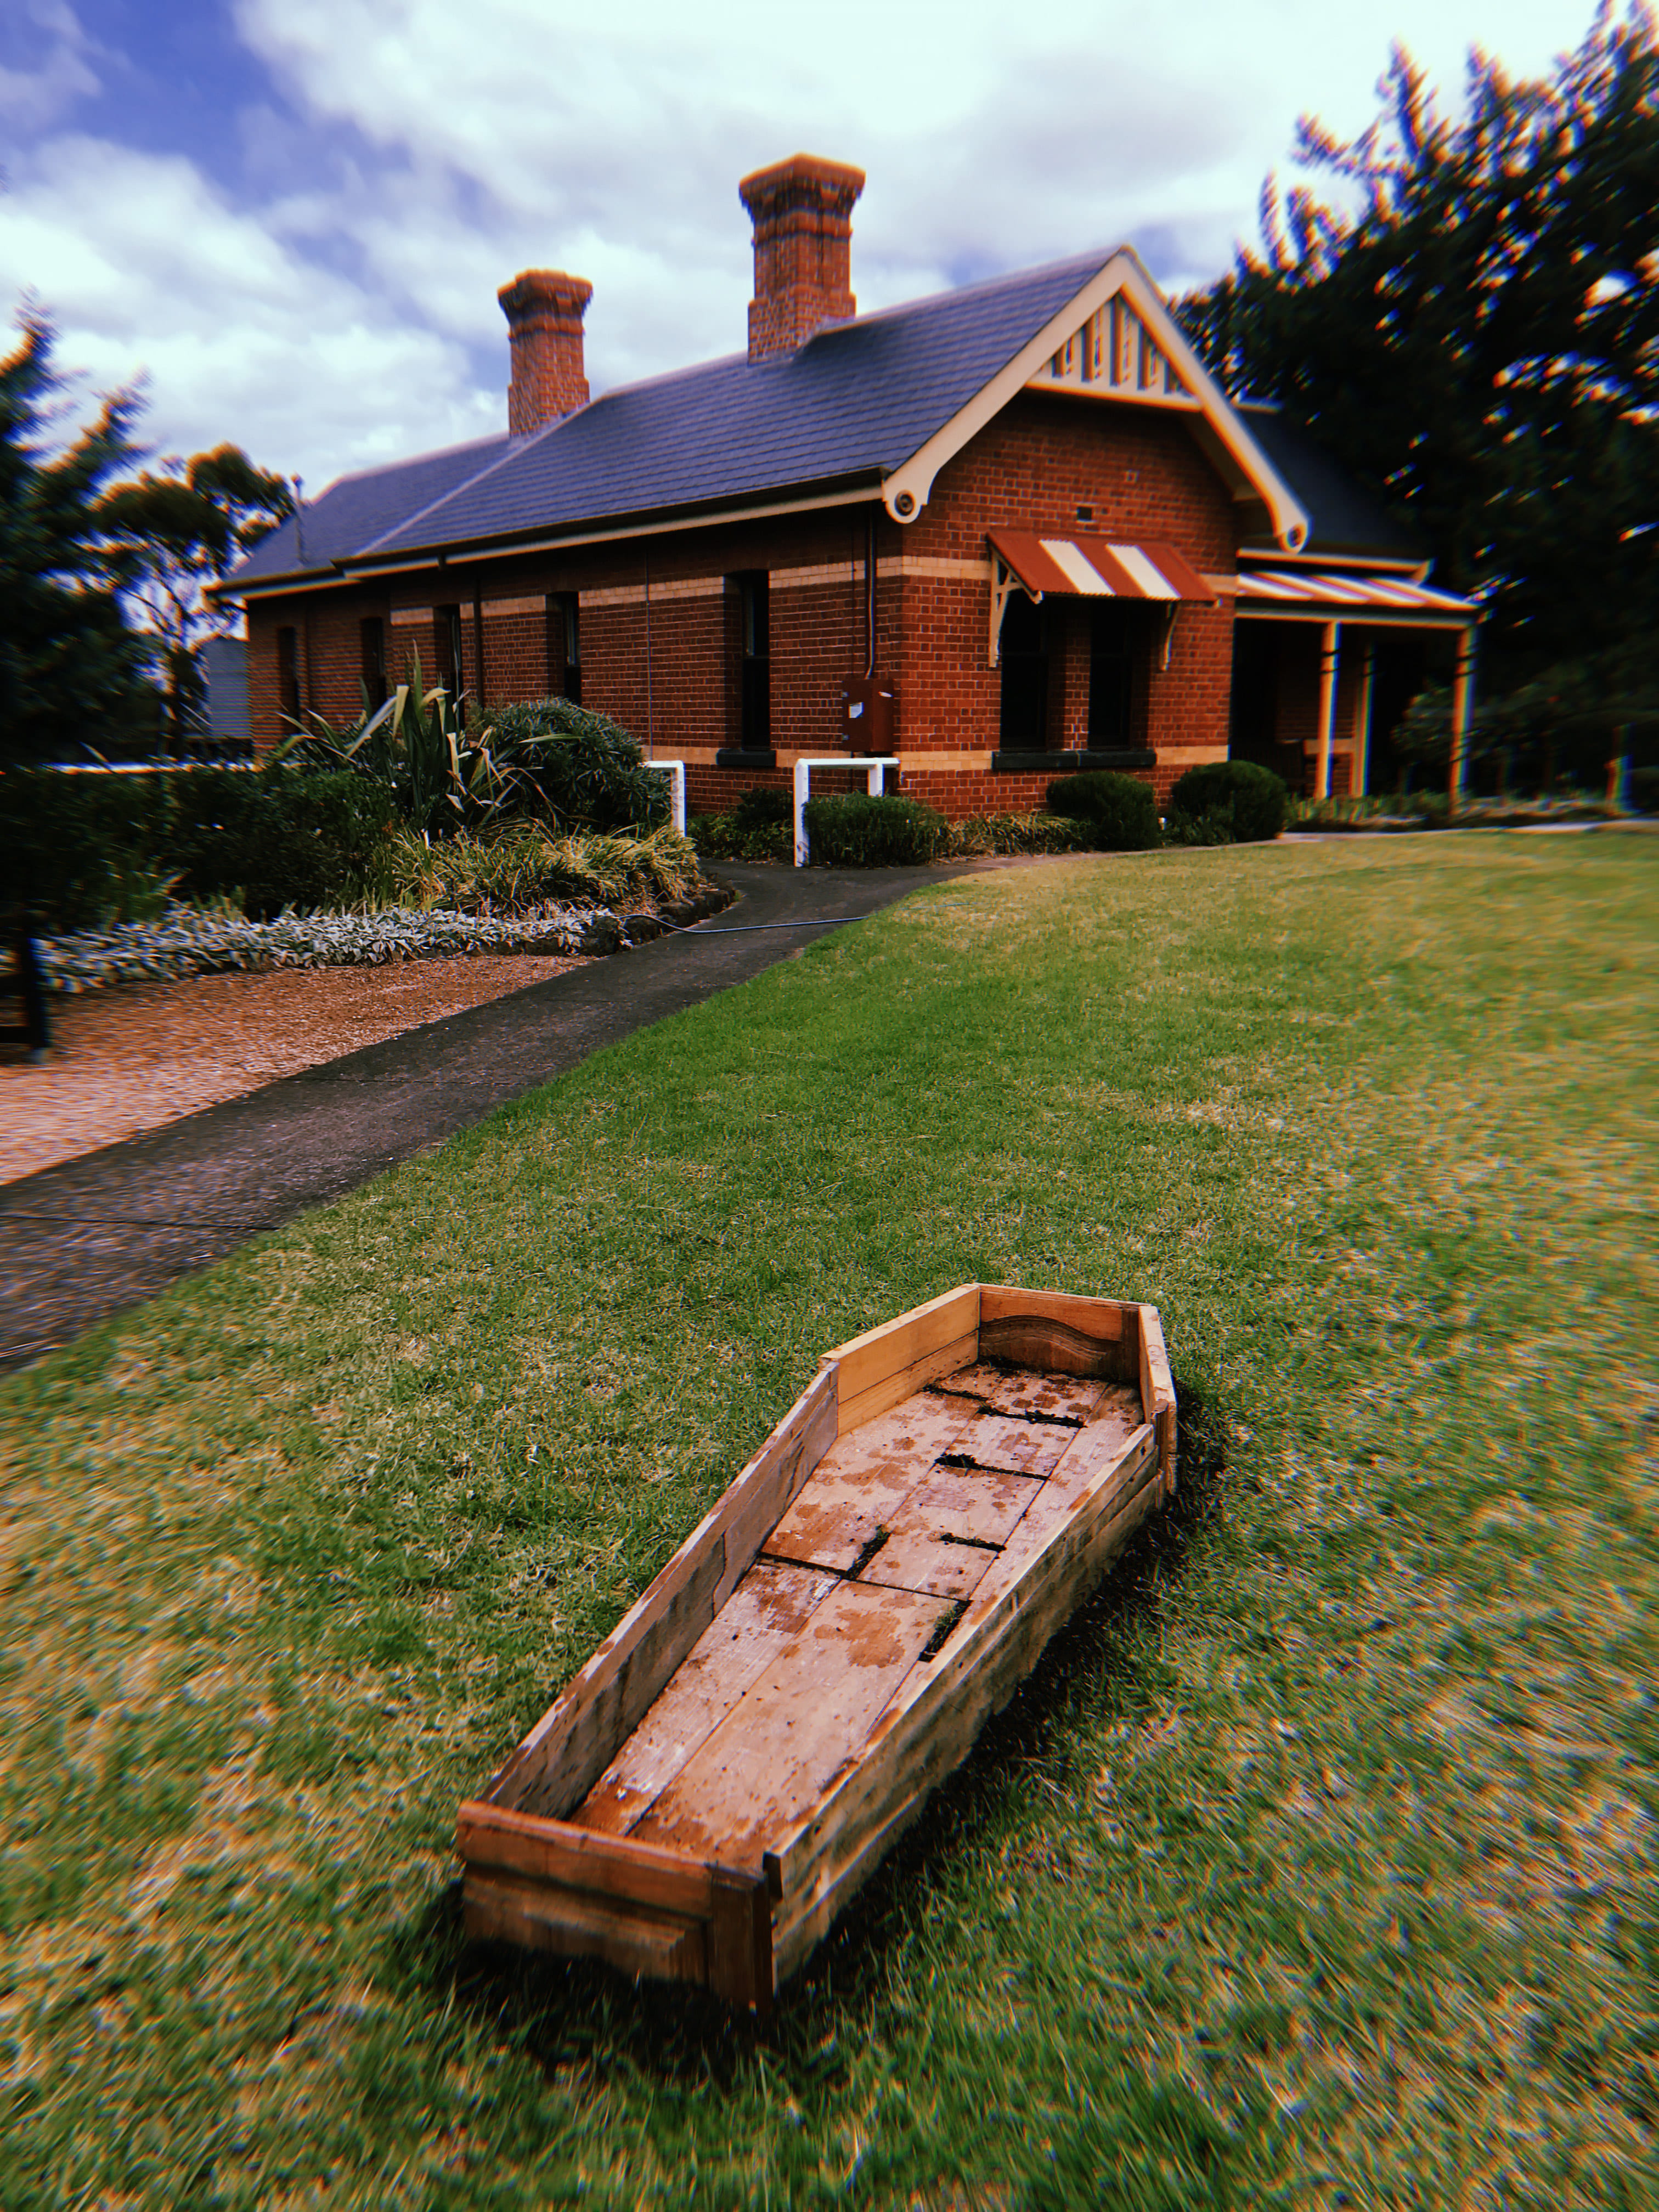 Photography of a coffin made from old wooden furniture lied on the grass.